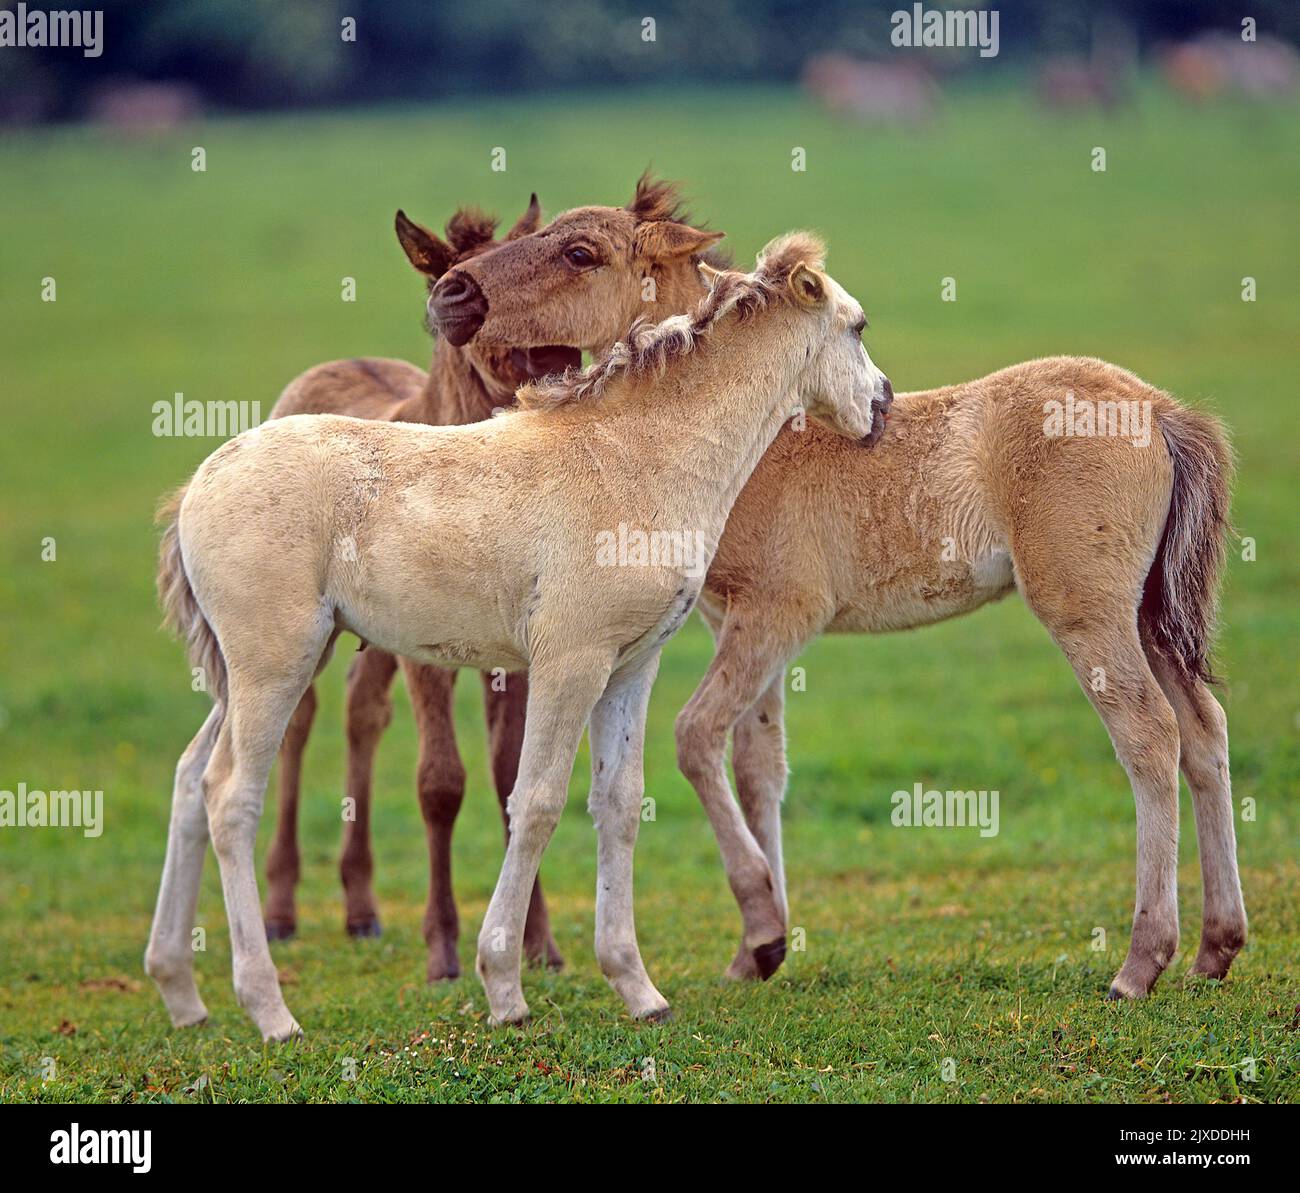 Duelmen Pony,. Three foals greet each other, get to know each other, sniff each other, new friends. Duelmen, Meerfelder Bruch, North Rhine-Westphalia. Germany Stock Photo